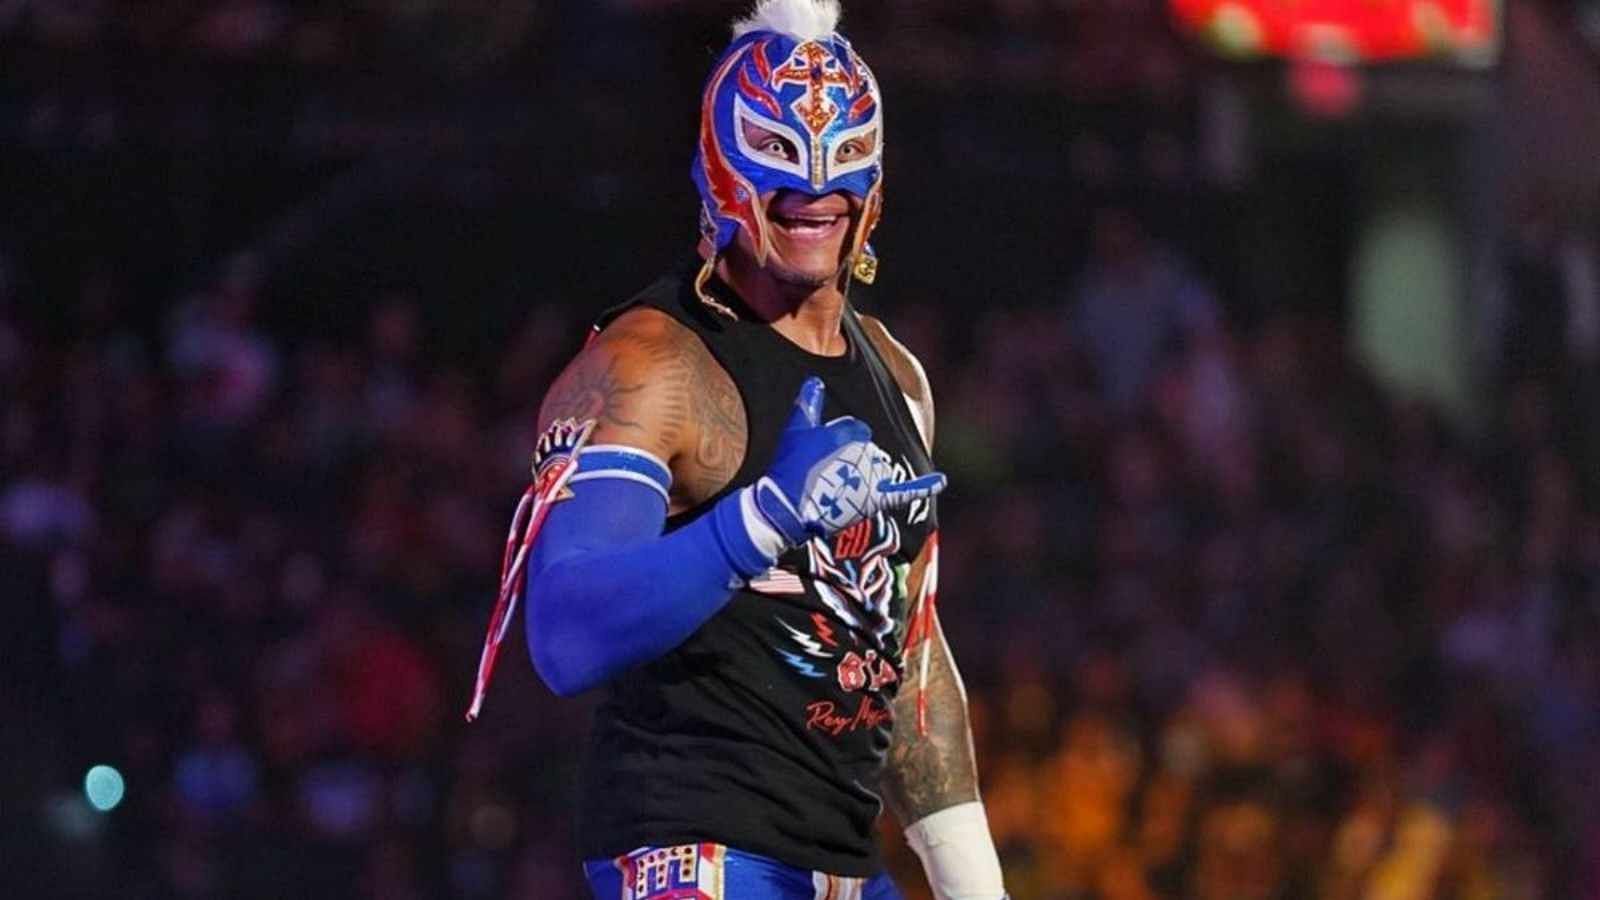 Rey Mysterio joined the WWE Hall of Fame this year.